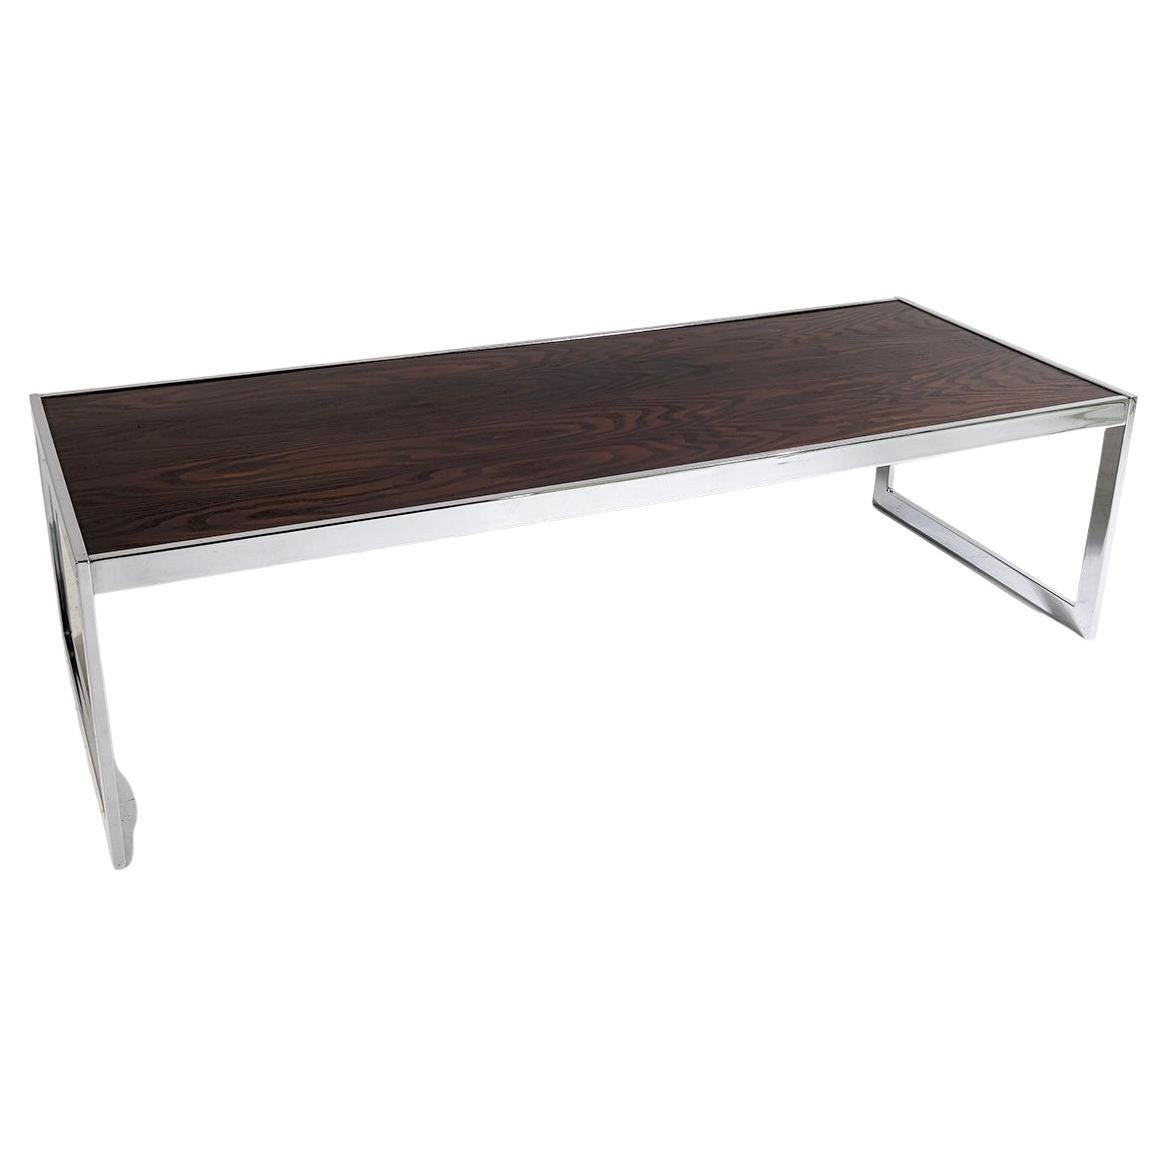 1970s Mid Century Chrome Rosewood Coffee Table in the Style of Merrow Associates For Sale